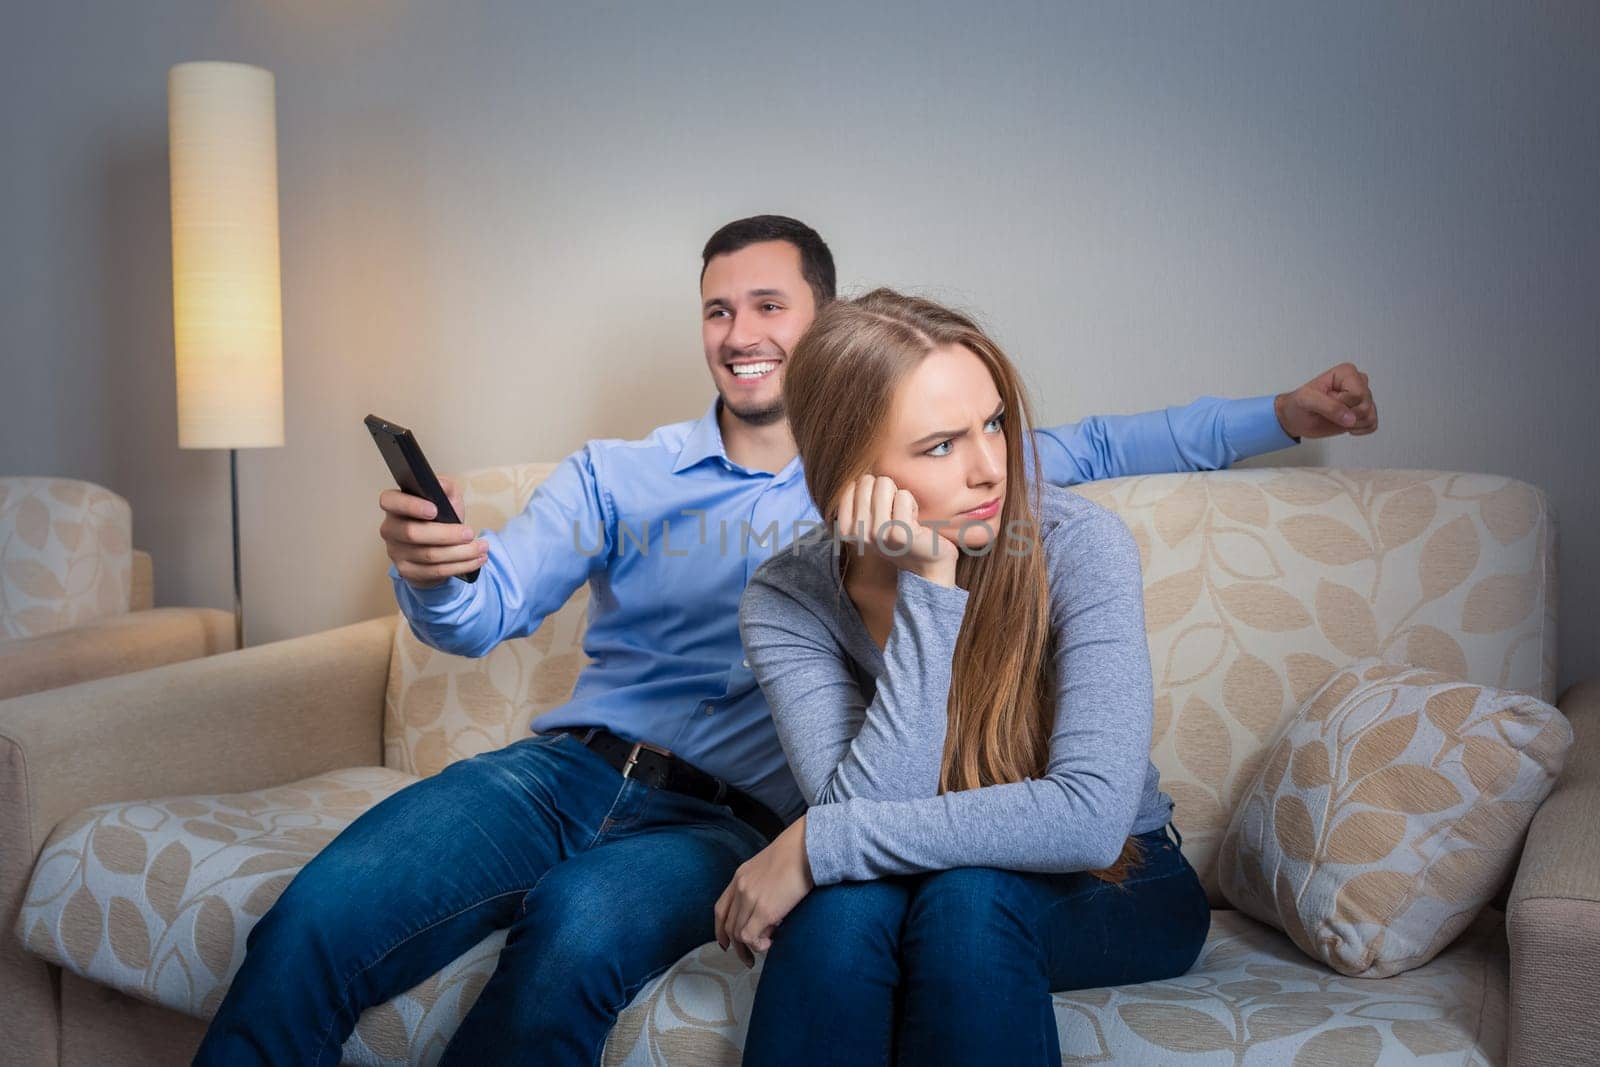 Portrait of couple sitting on sofa watching television. Image of hapy man with remote control in hands and upset woman